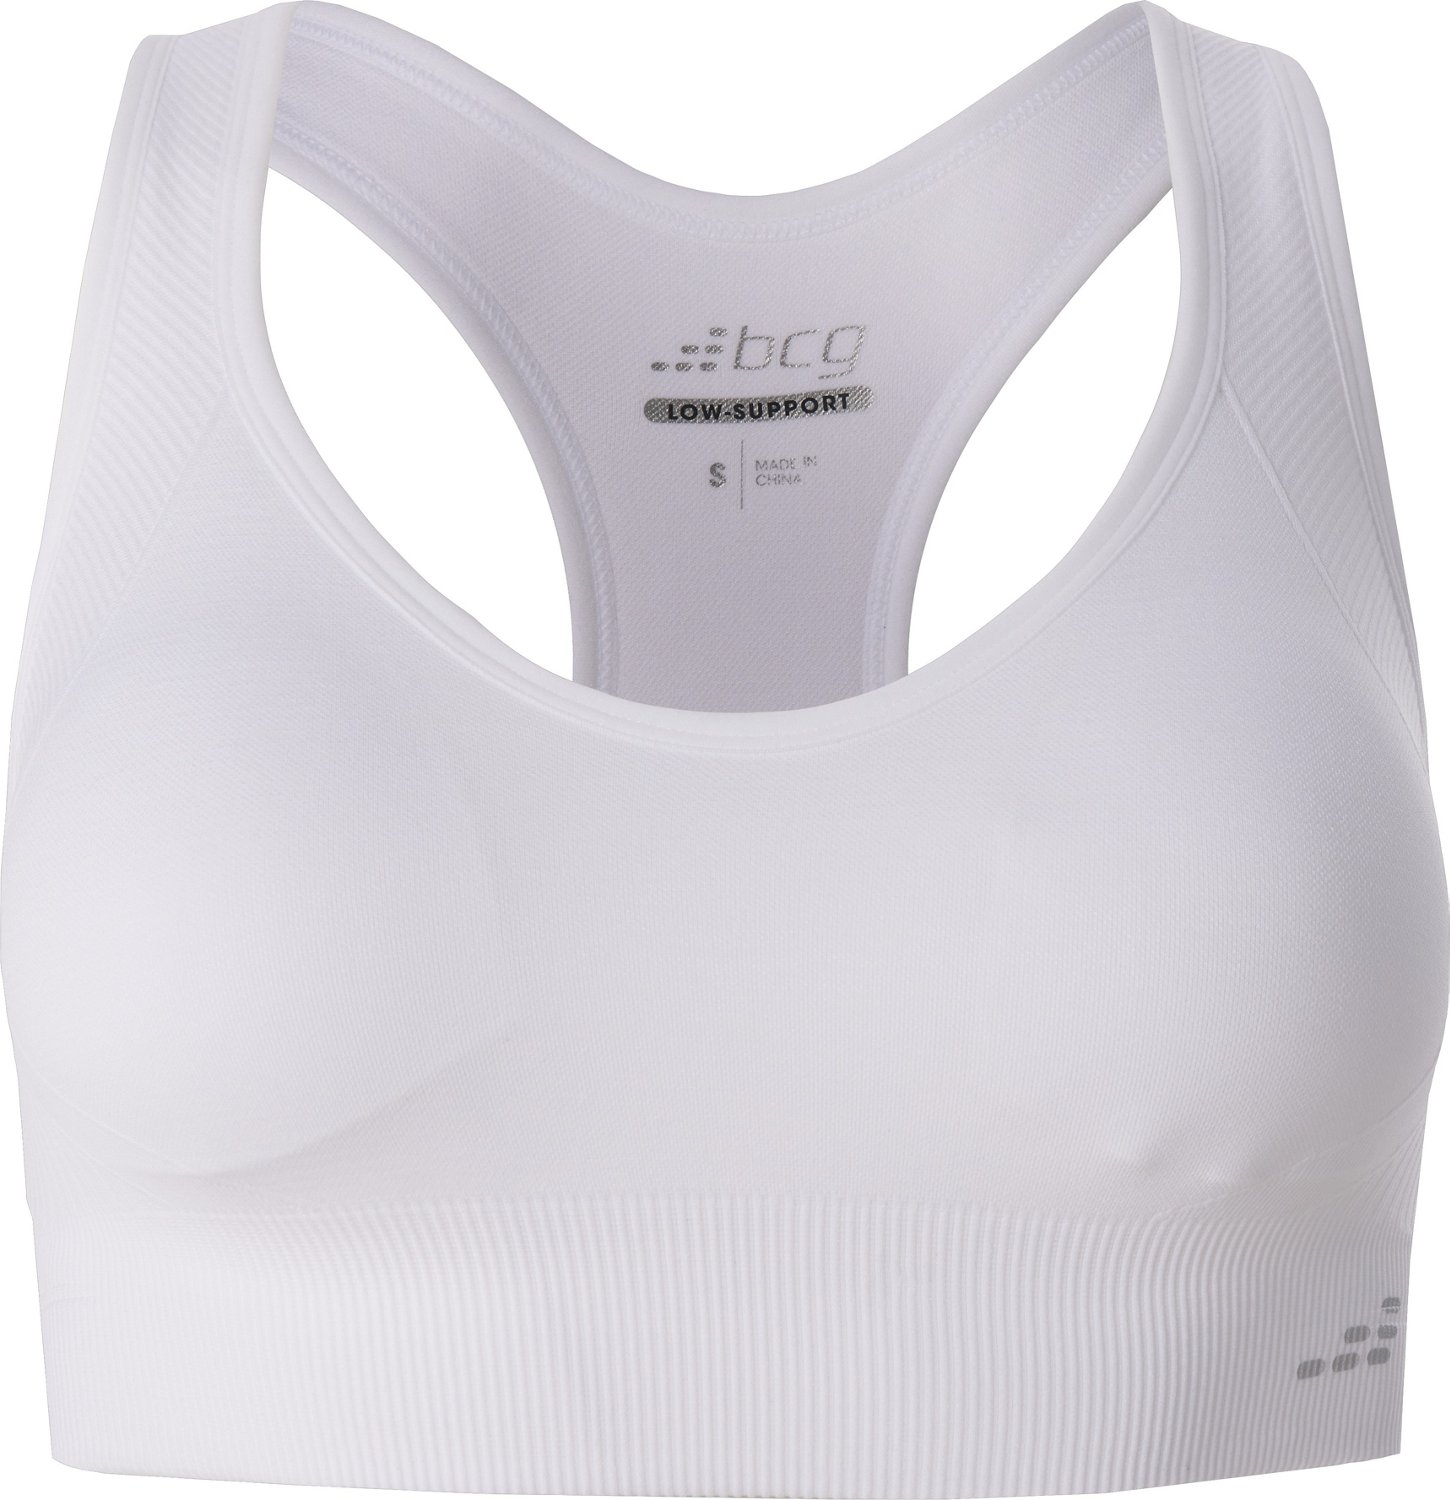 Women's Mountain Athletics Sports Bra by The North Face